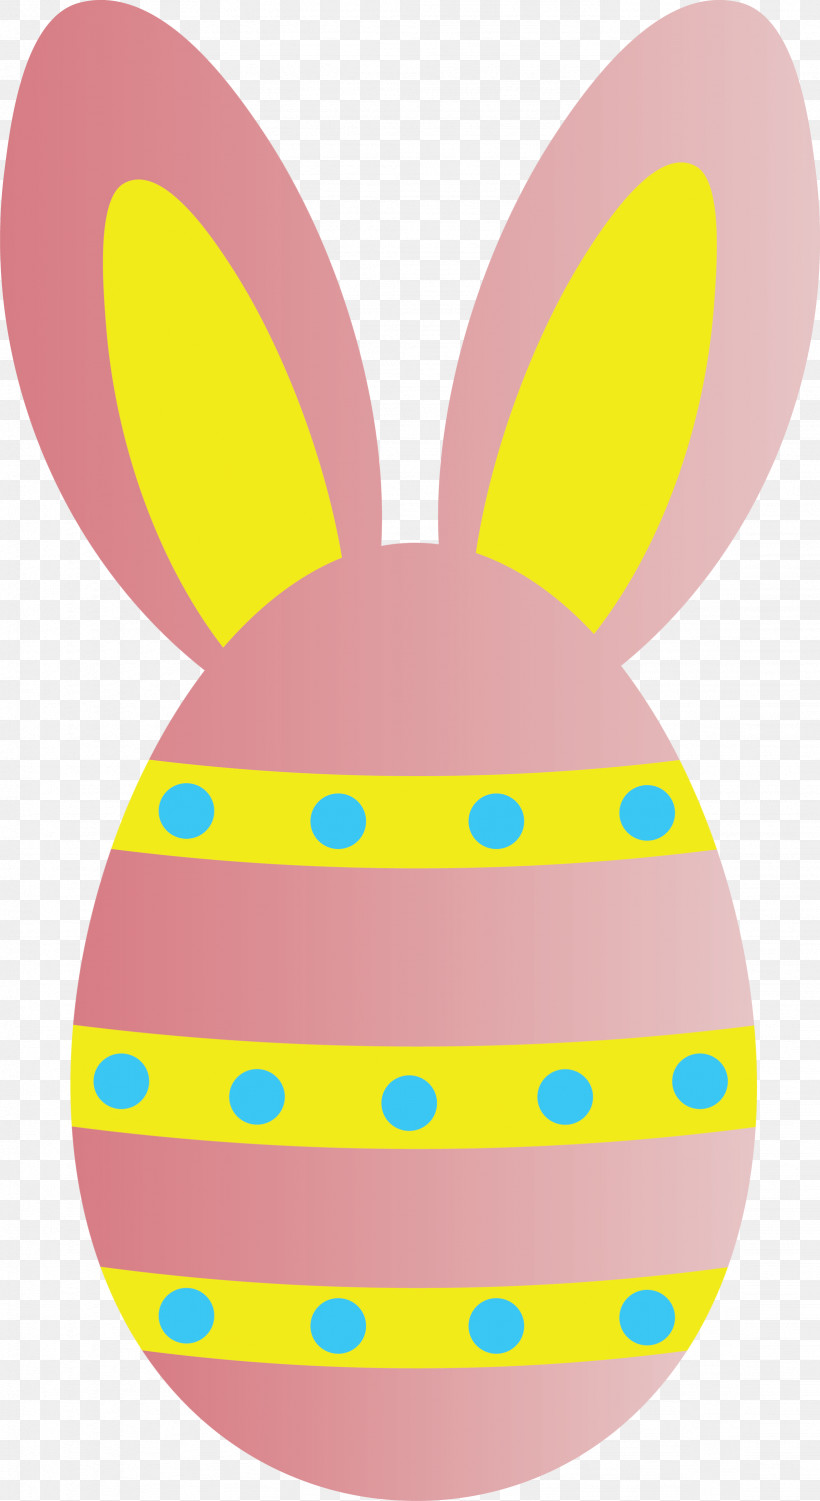 Easter Egg With Bunny Ears, PNG, 1638x3000px, Easter Egg With Bunny Ears, Easter Bunny, Easter Egg, Pineapple, Rabbit Download Free